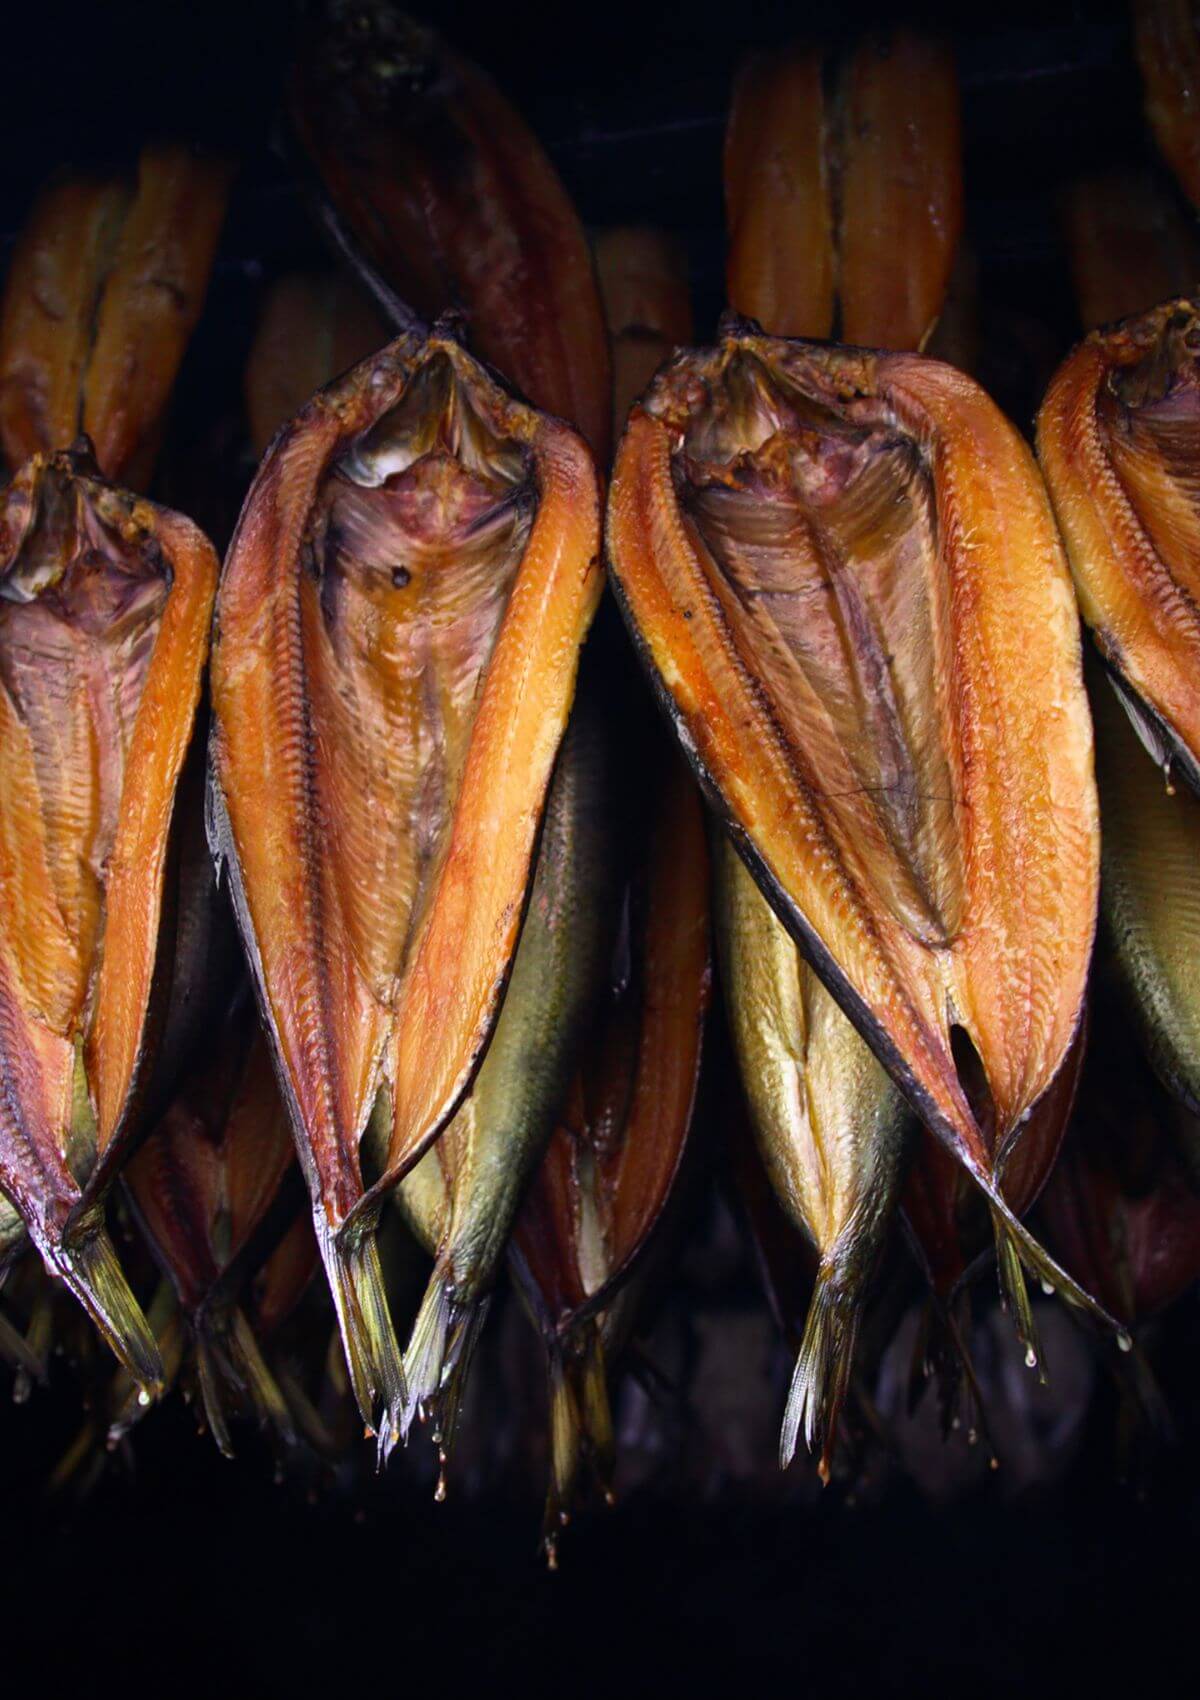 Smoked kippers from Seahouses in Northumberland